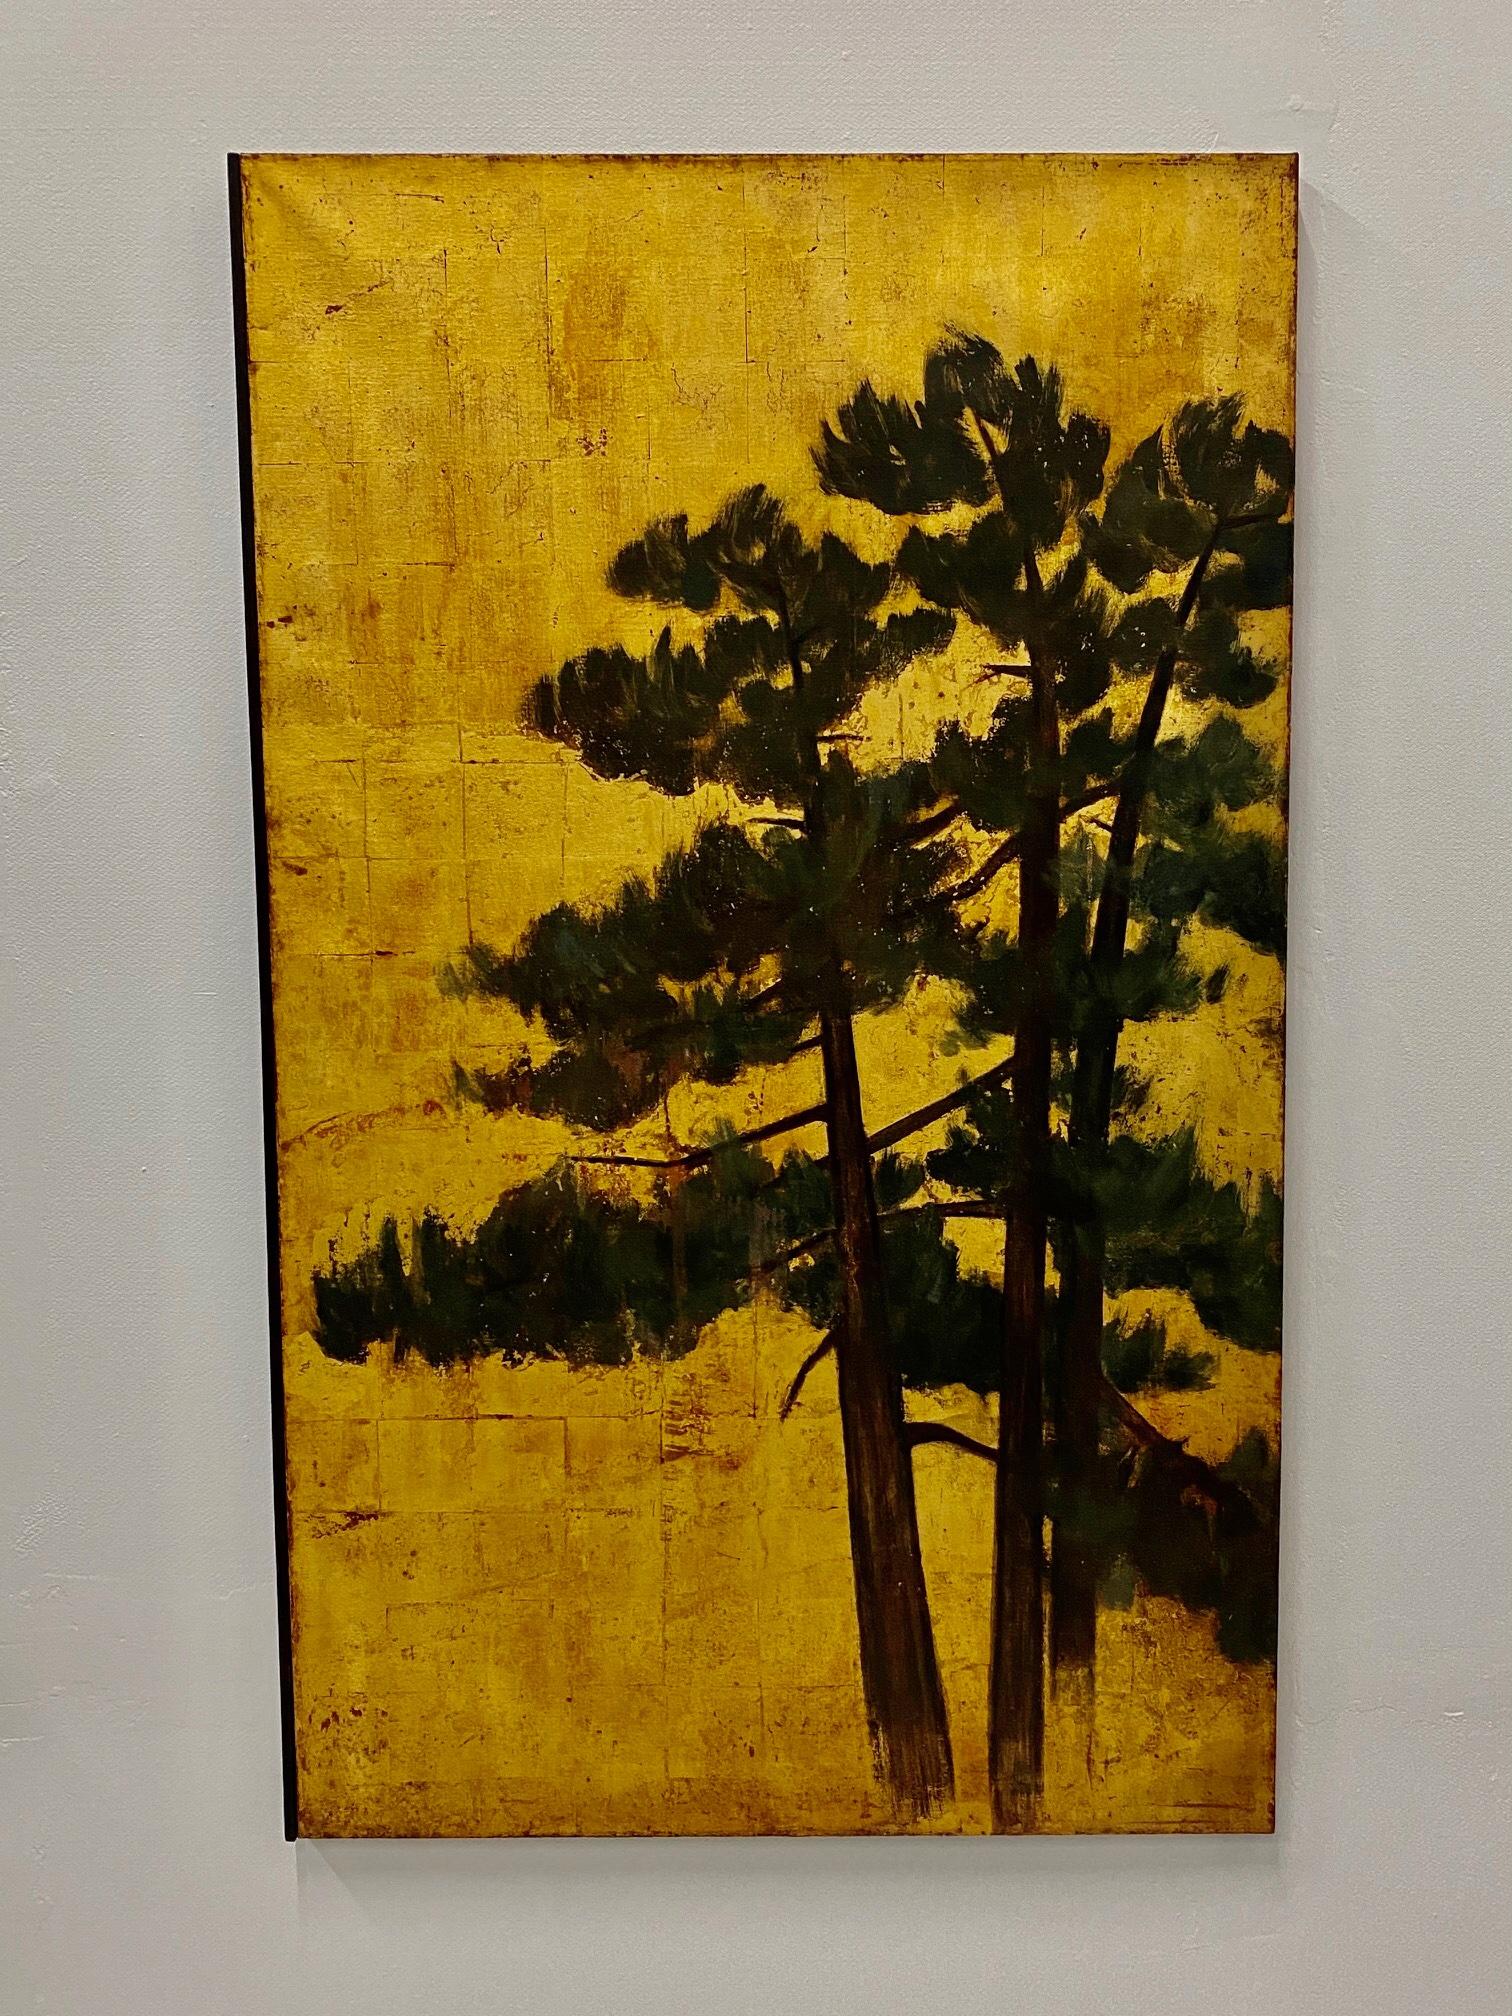 Exceptional Large 19th Century Triptych of Pine Trees Against Gold Leaf Sky 1